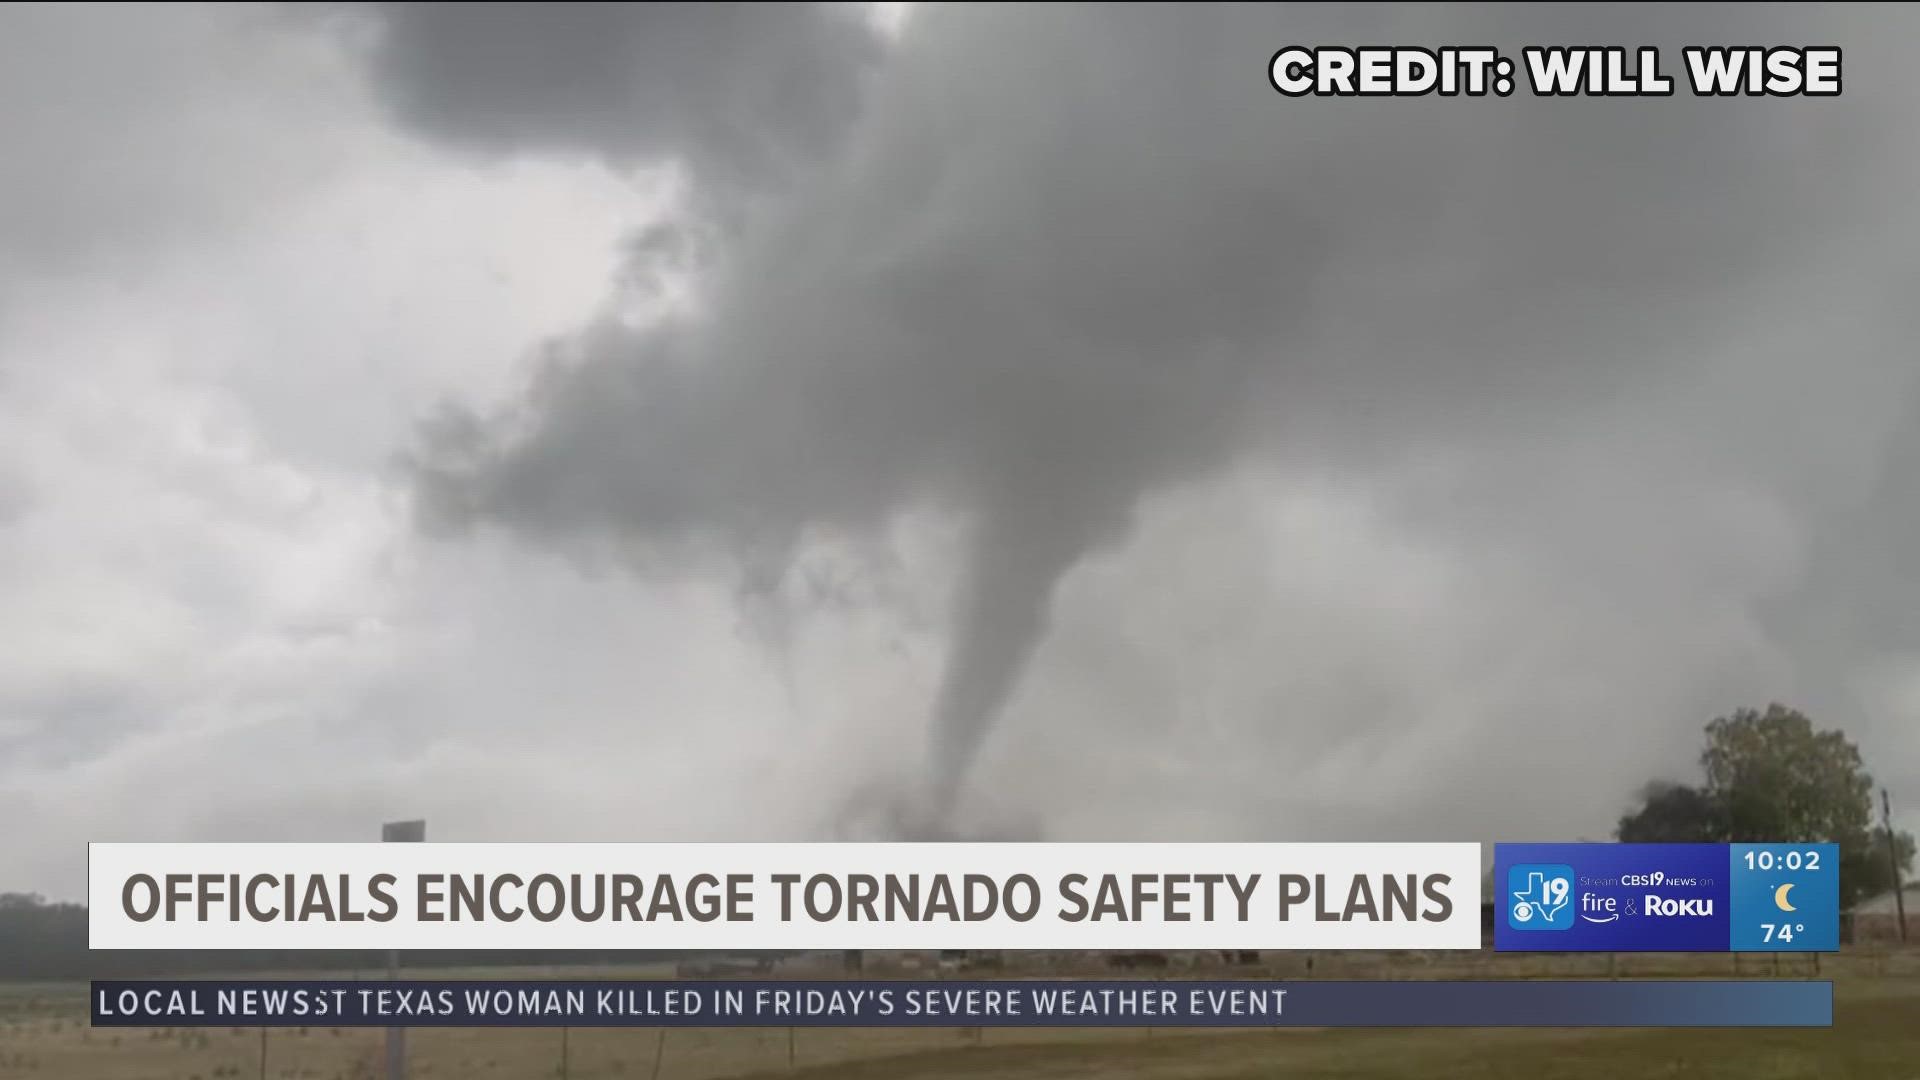 East Texans asking for safety shelters during tornados 